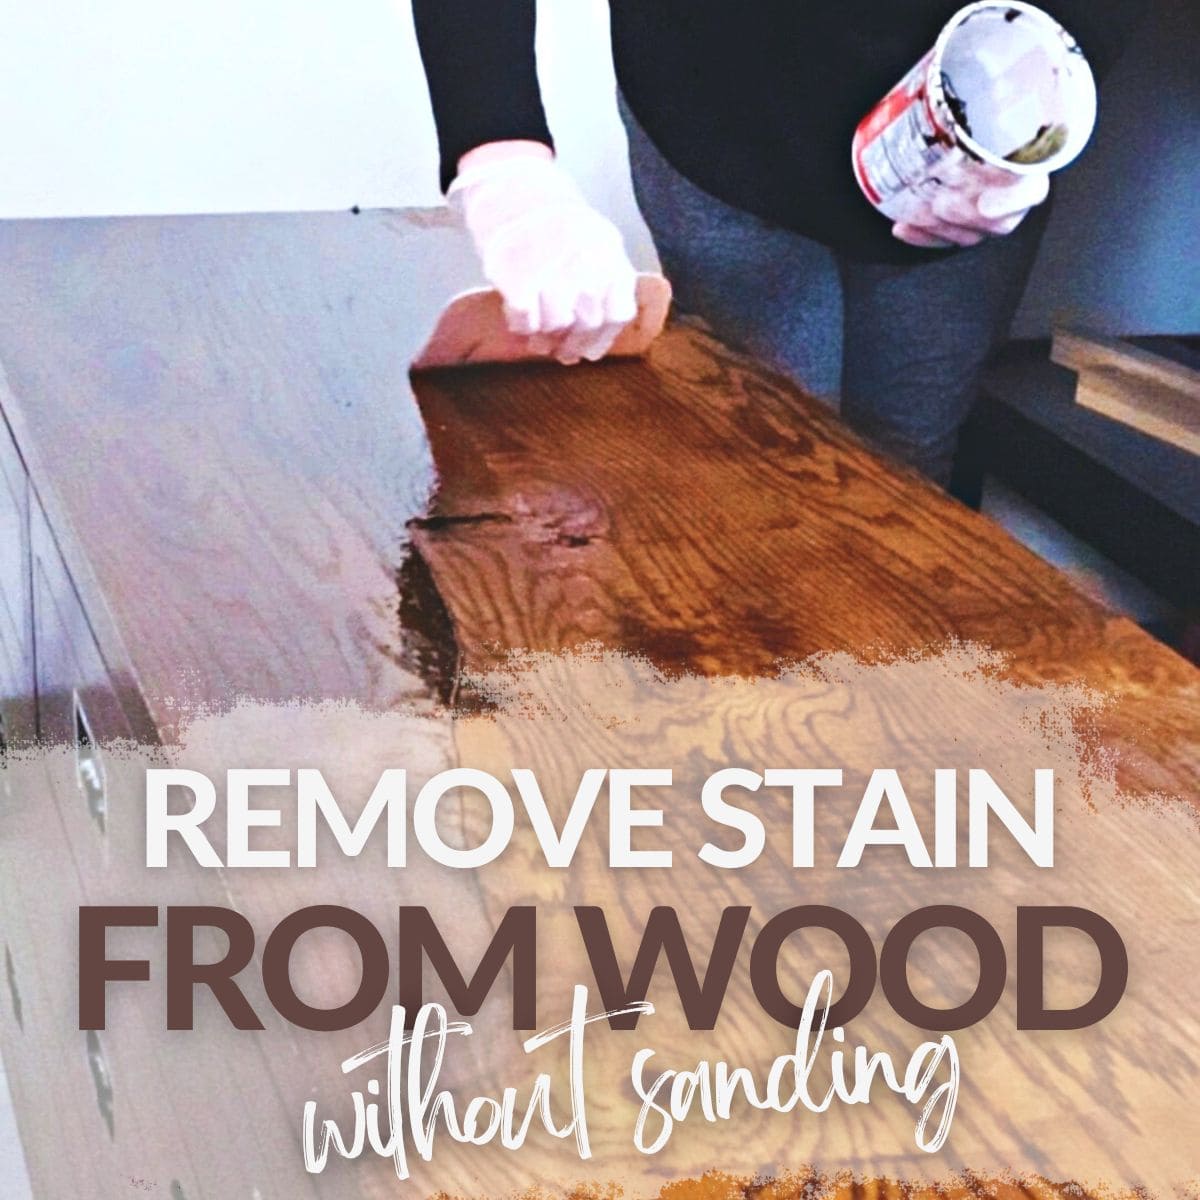 Remove Stain From Wood Without Sanding